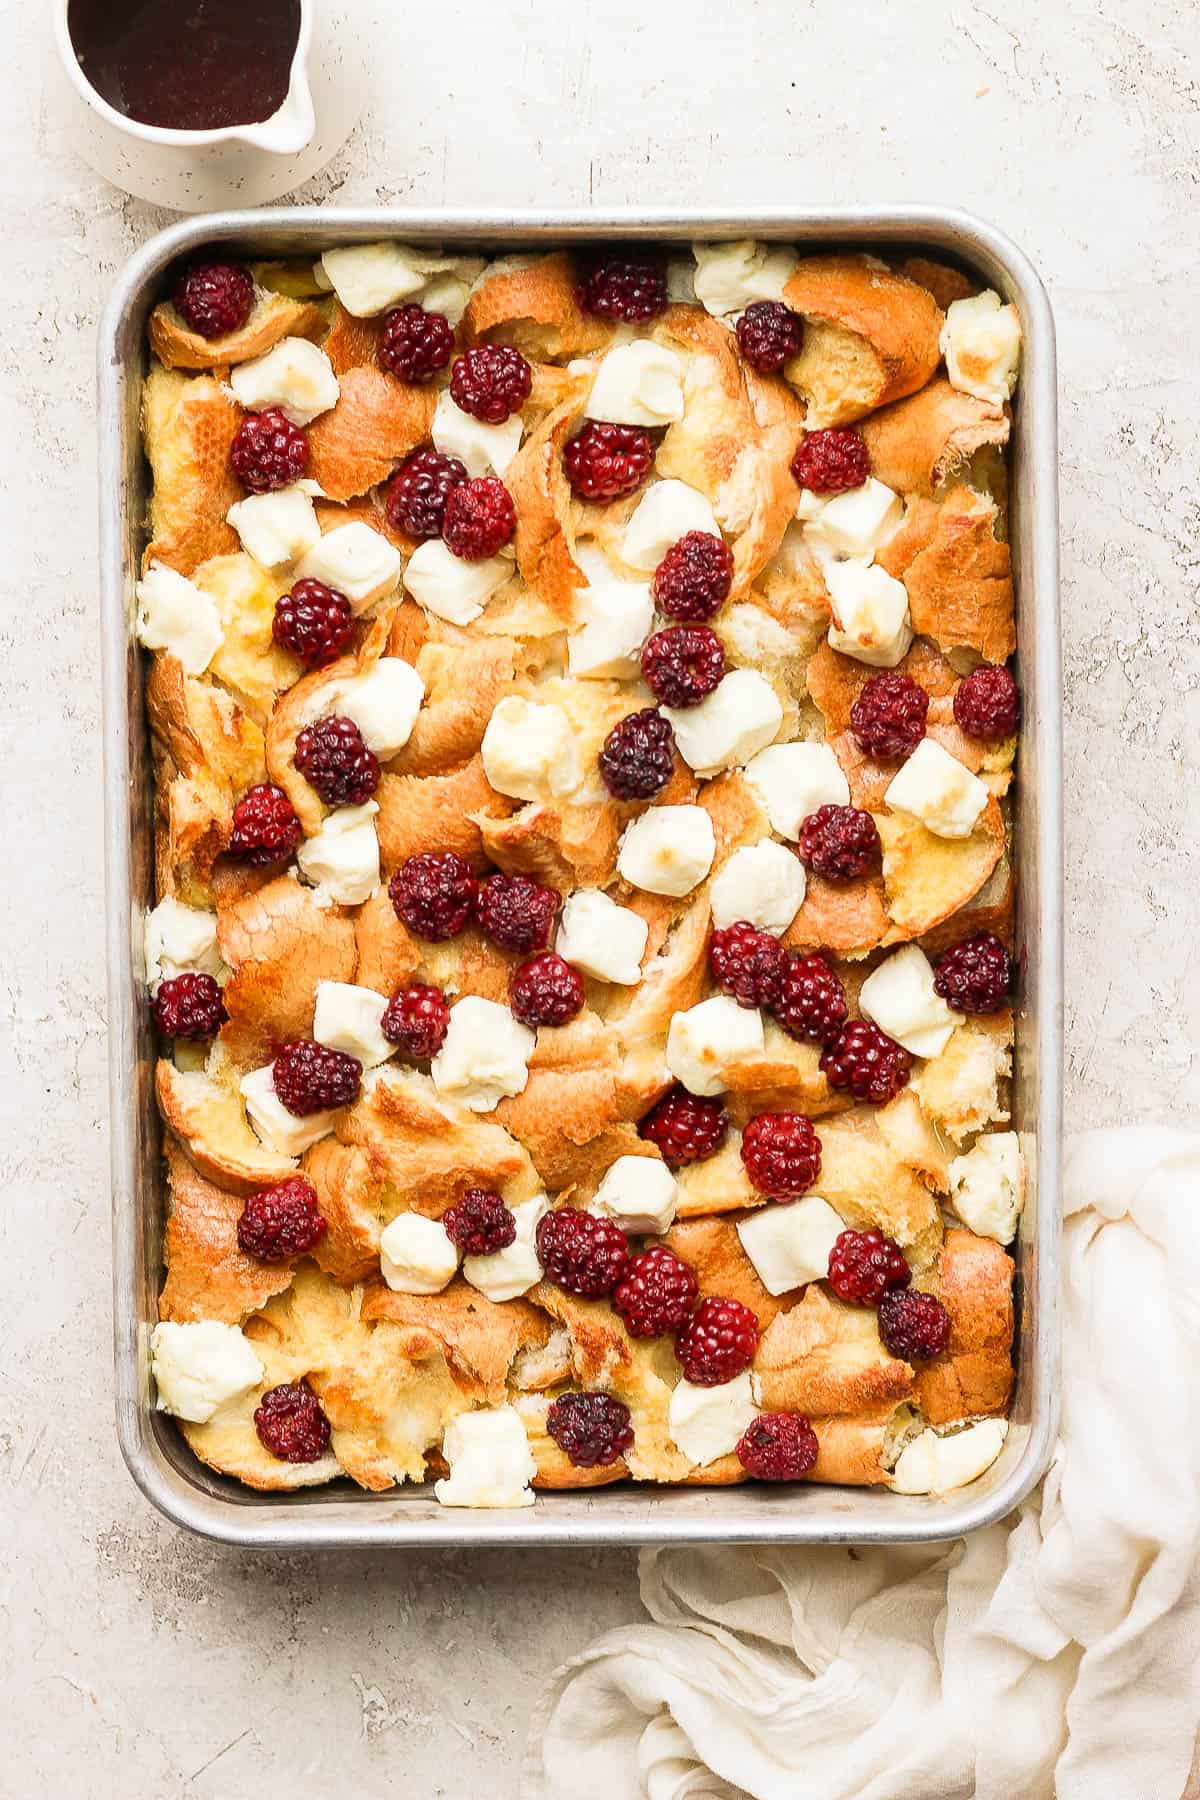 A cooked french toast bake with cream cheese and blackberries on top.